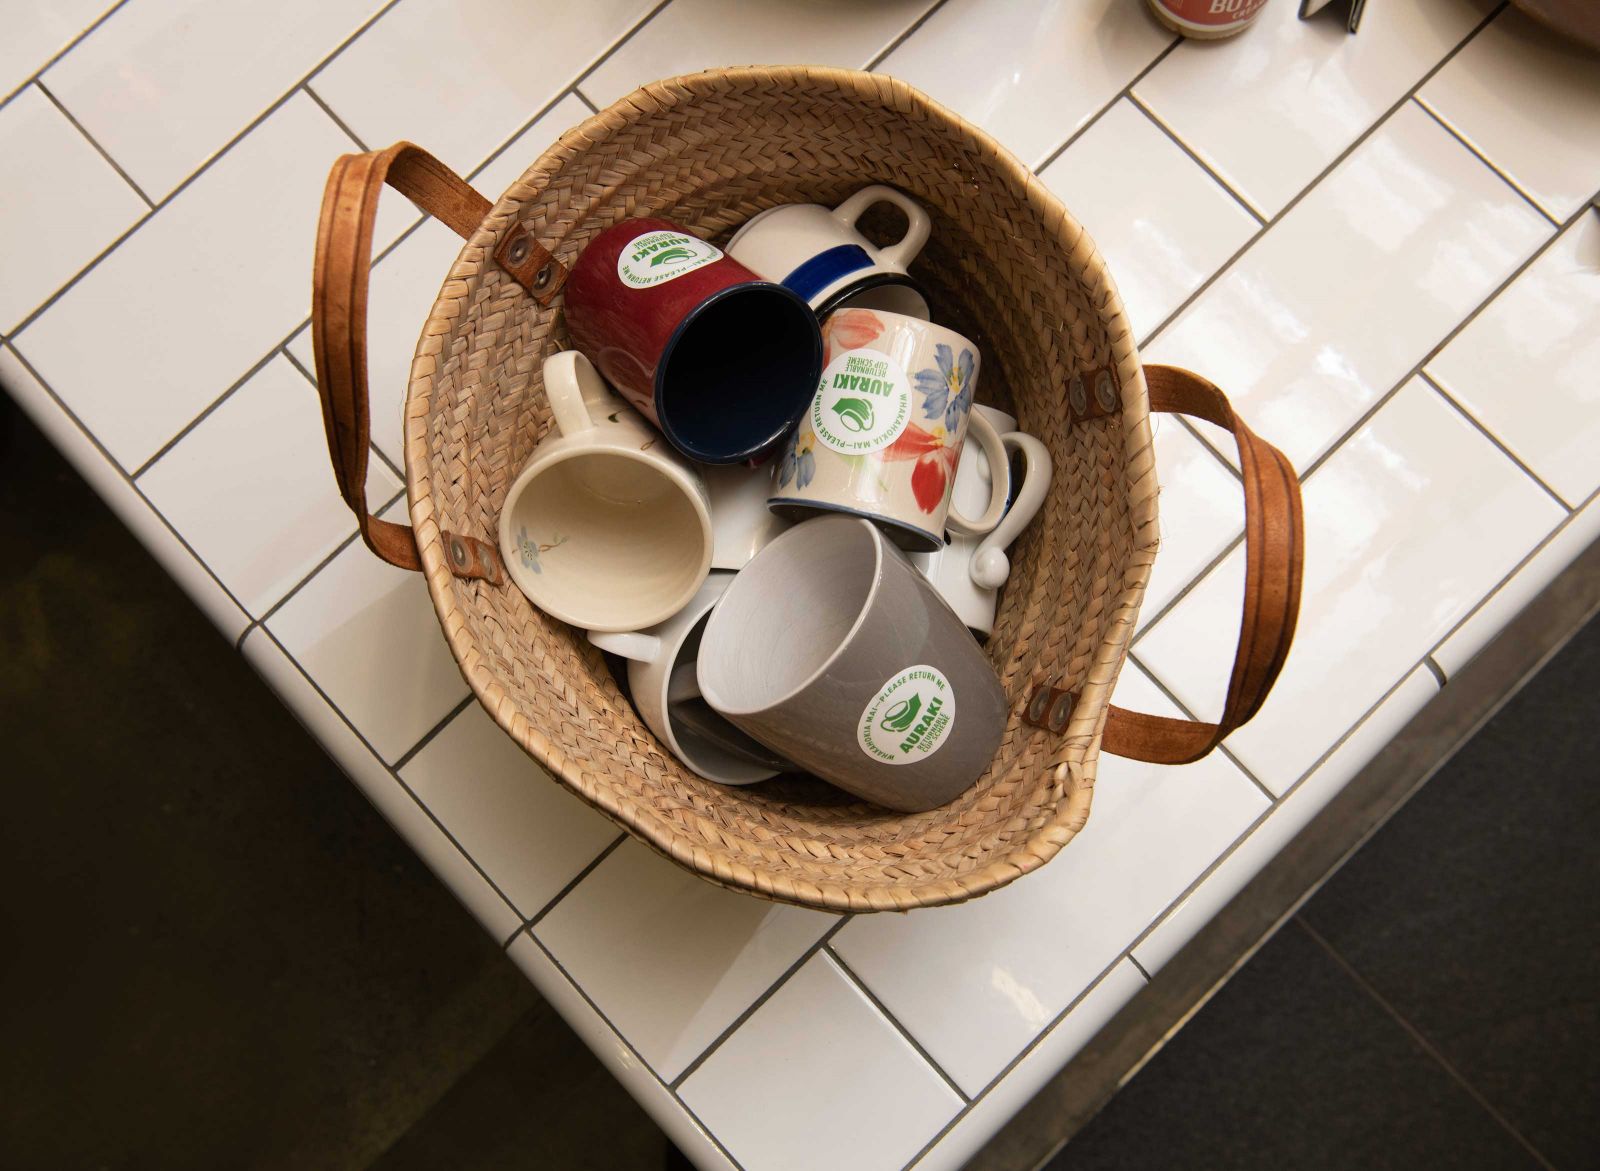 Basket of coffee cups